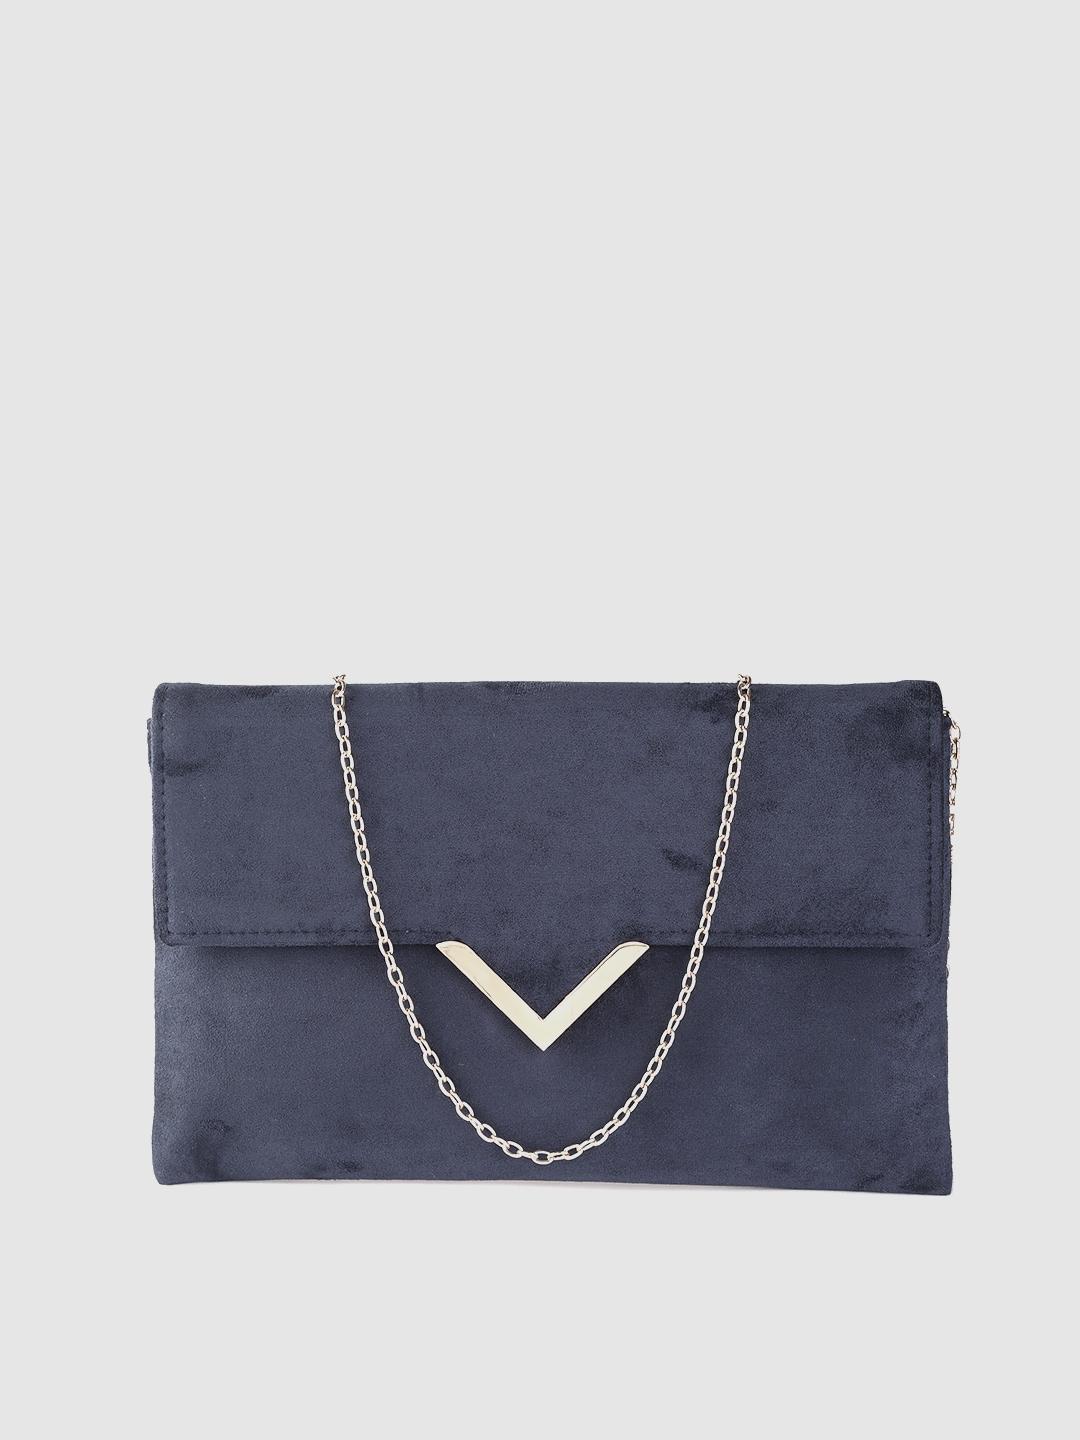 accessorize navy blue solid envelope clutch